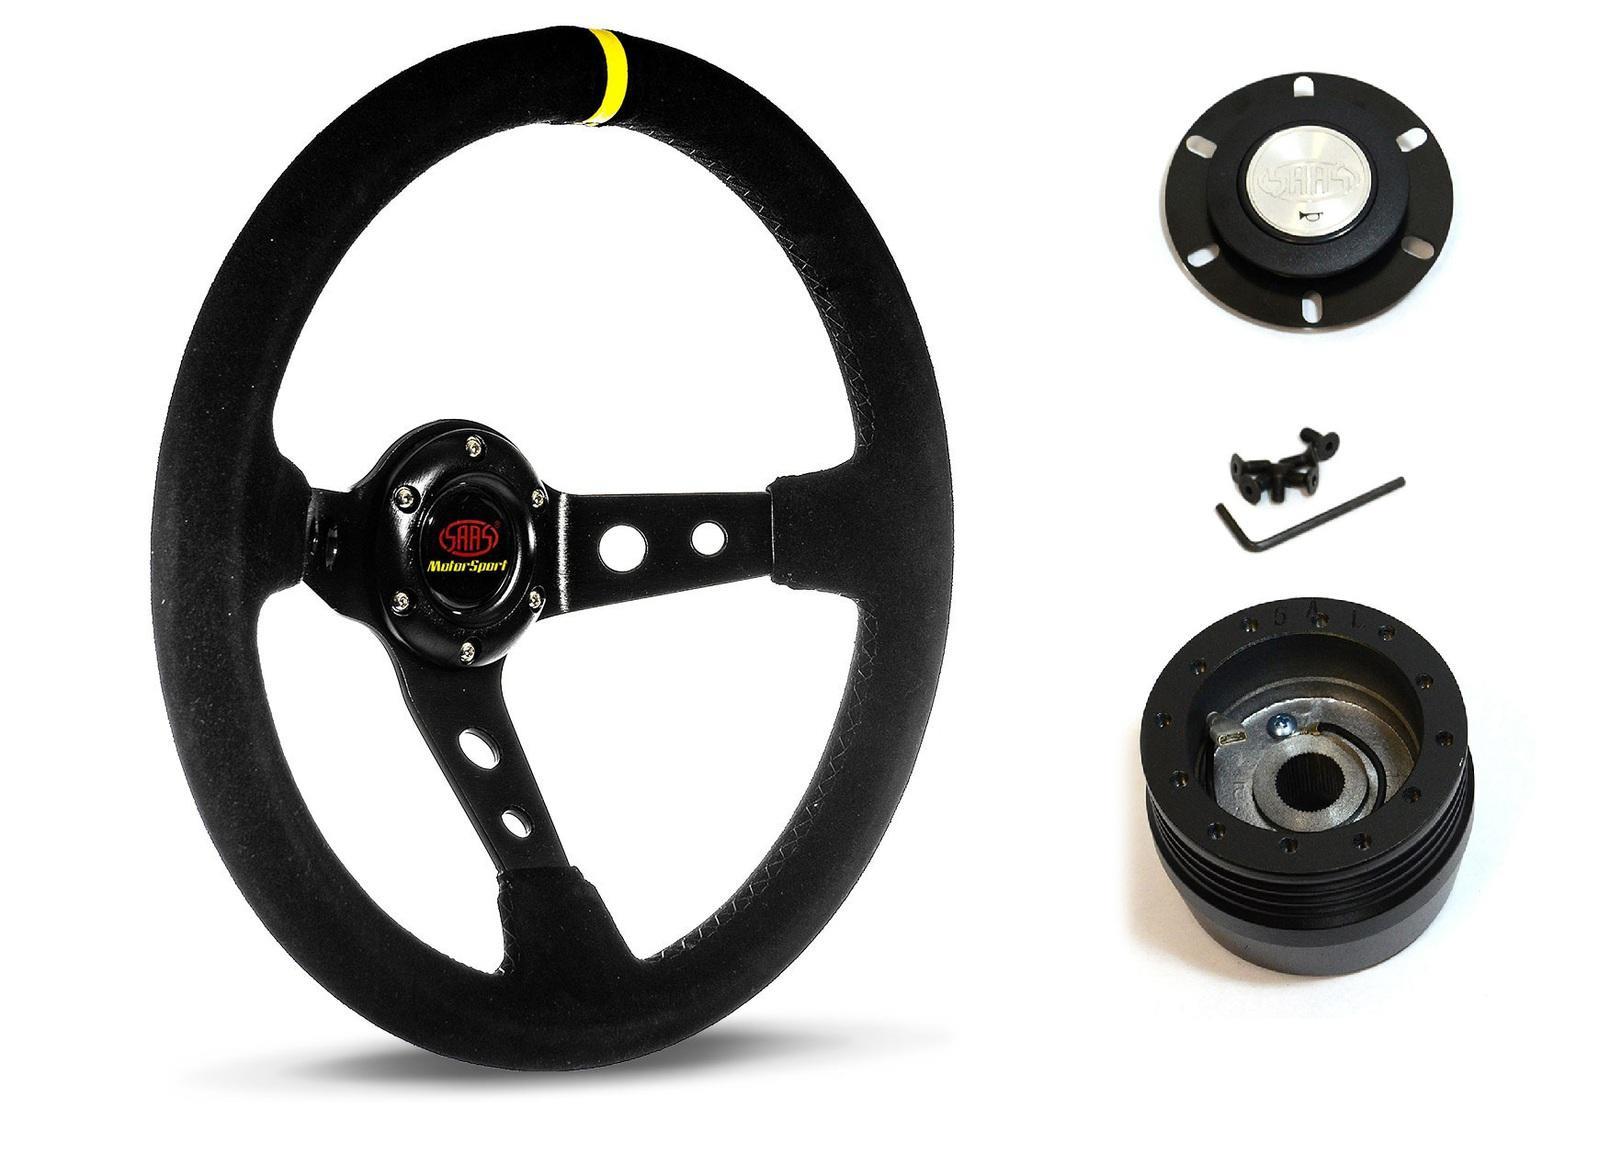 SAAS Steering Wheel Suede 14" ADR GT Deep Dish Black With Holes + Indicator SWGT1 and SAAS boss kit for Mitsubishi Sigma GJ GK GN 1982-1988